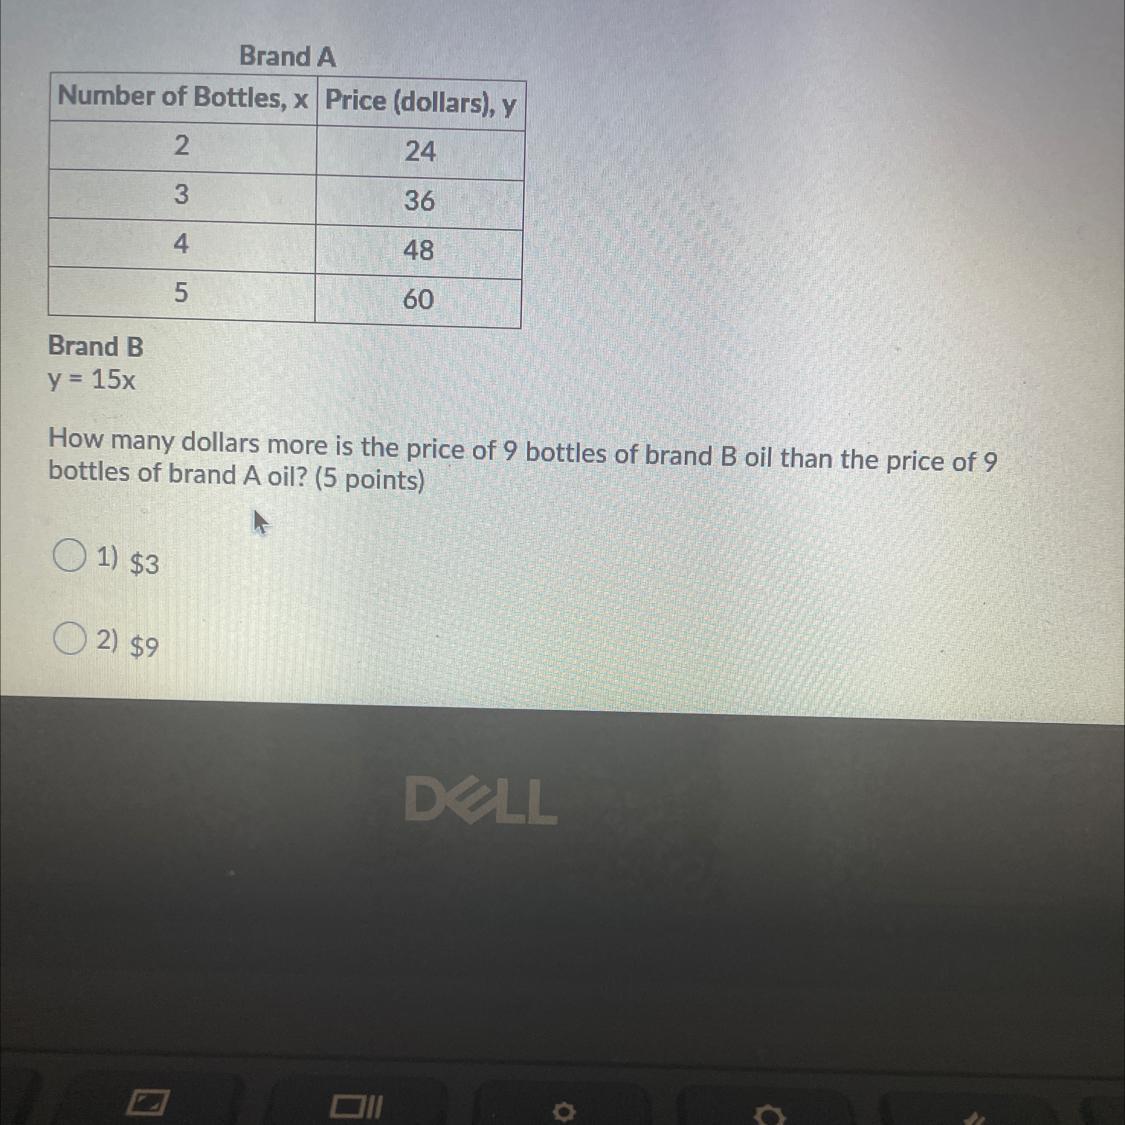 Help Please This Is A Practice Question For Points-The Other Options Are $18 And $27